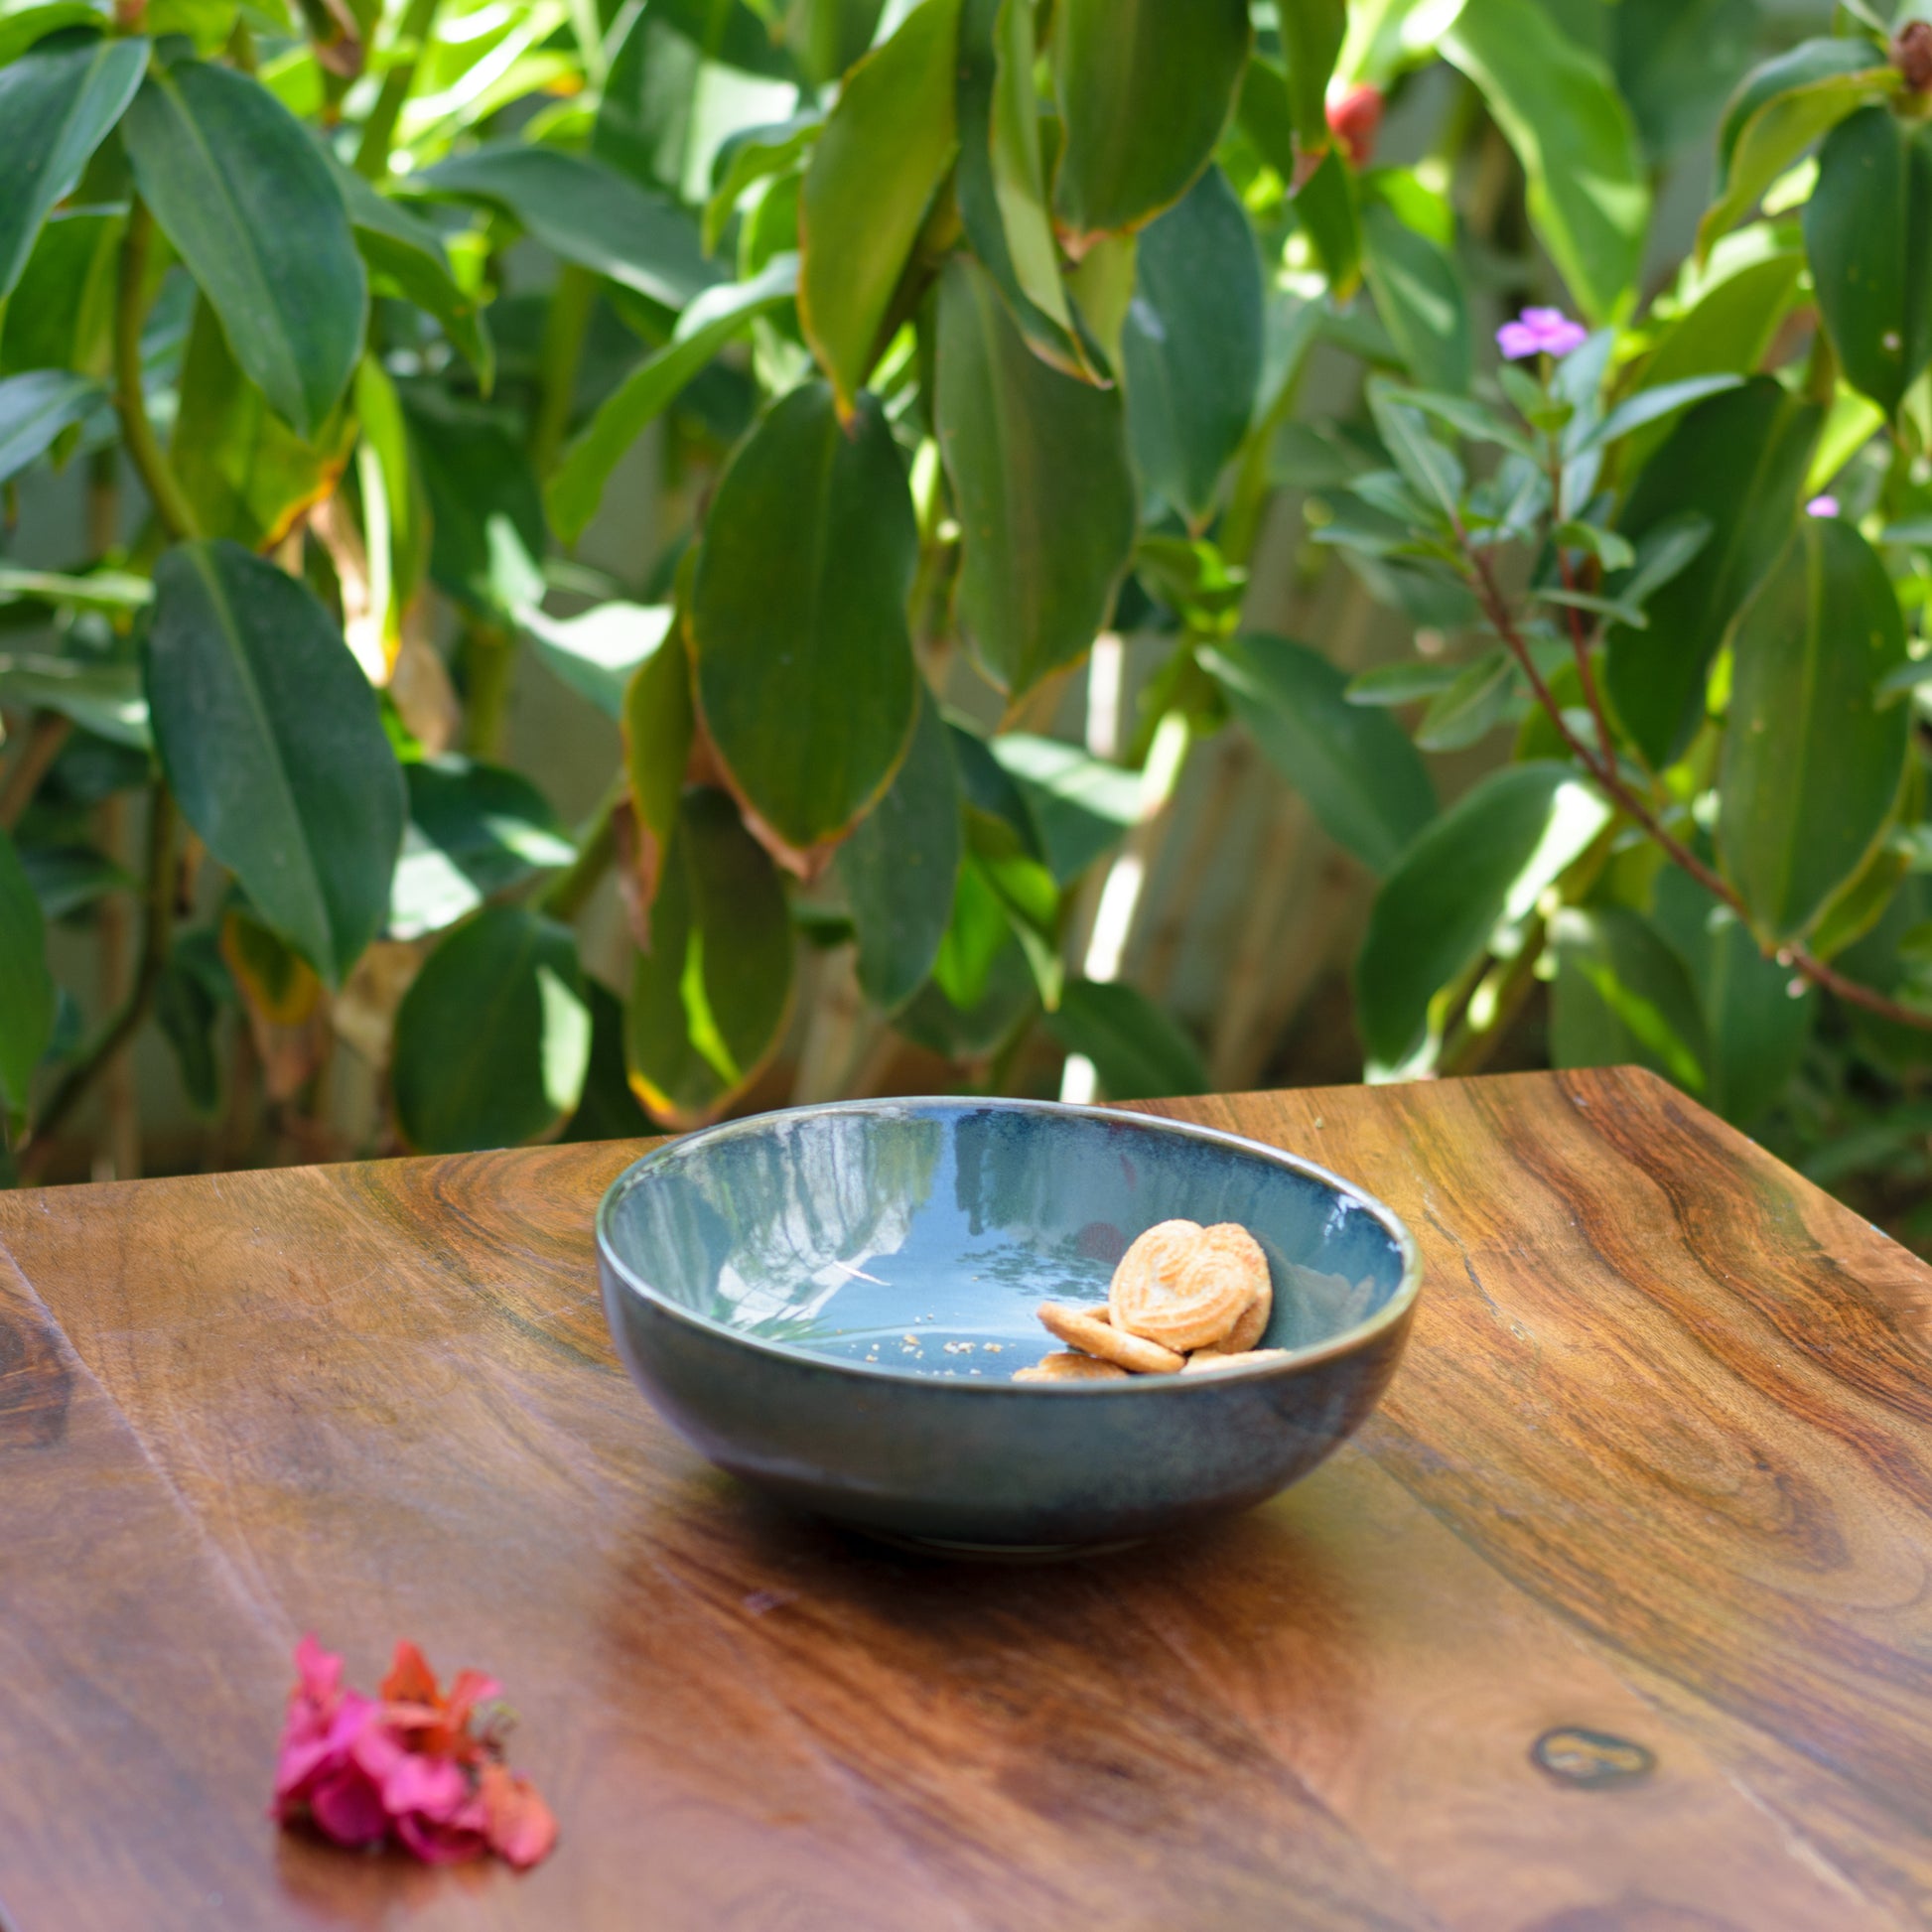 A ceramic bowl with tones of green glaze and a few biscuits on a table in an outdoor setting. Elegant and must-have. Shop gifting items in Bangalore.